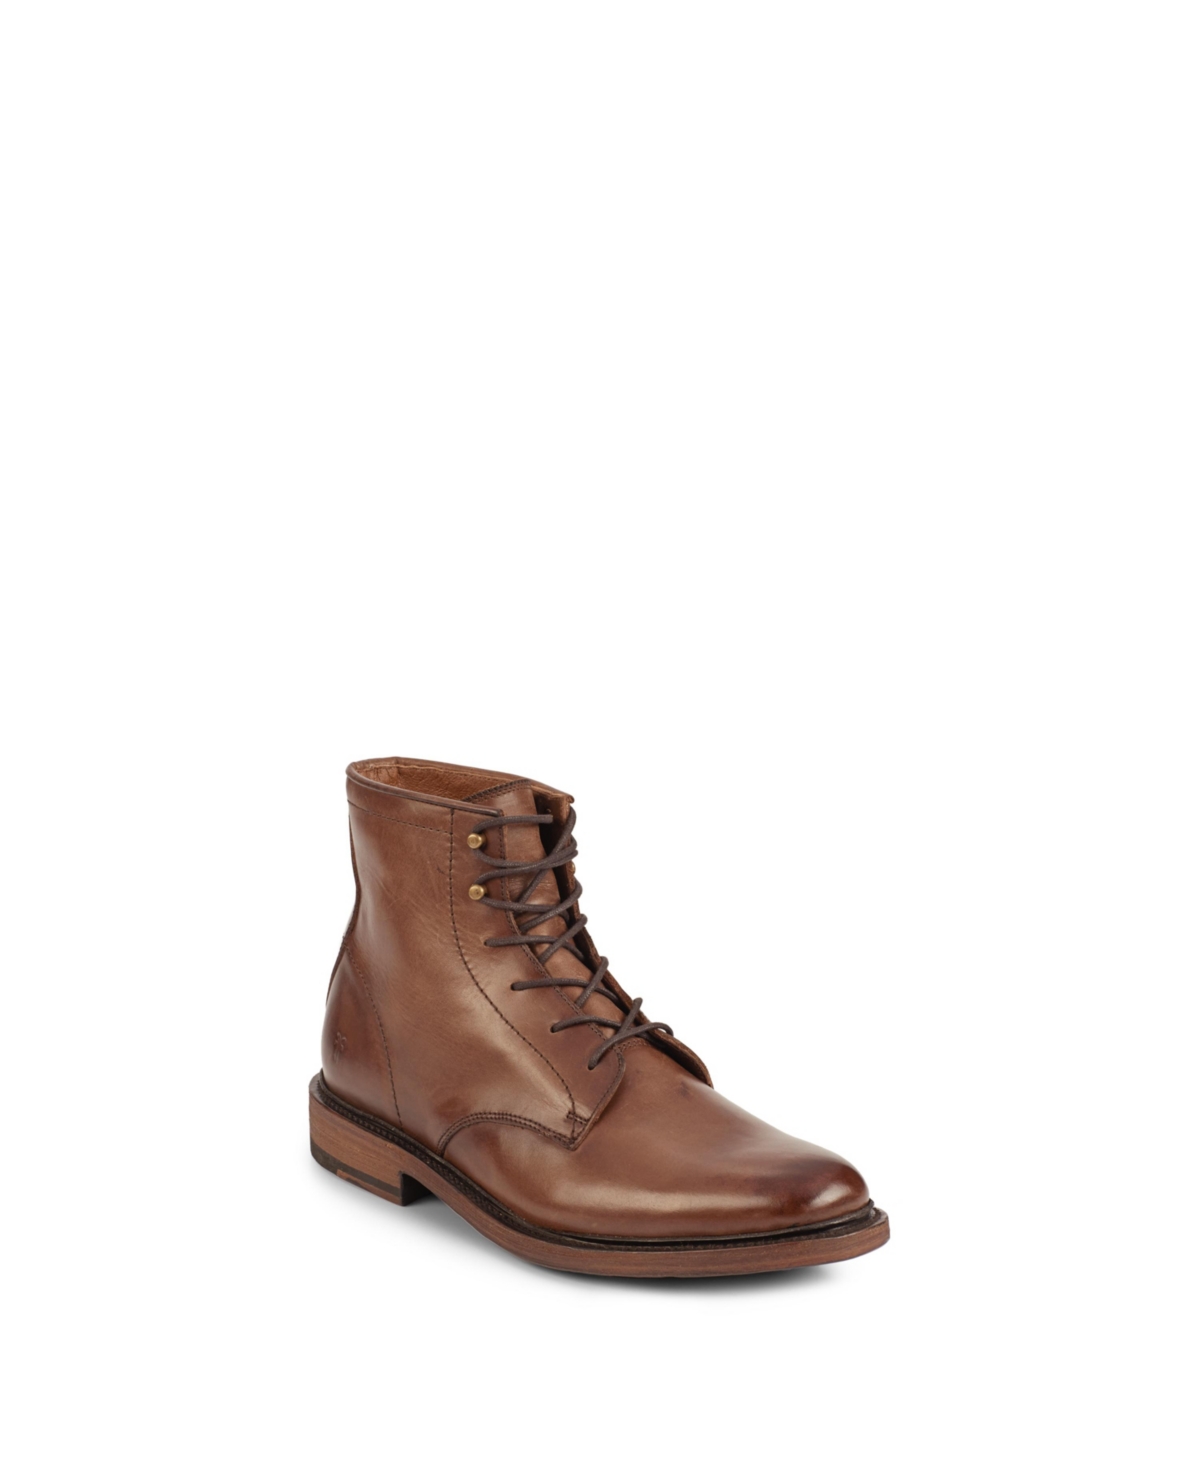 Men's James Lace-up Boots - Dark Brown Leather